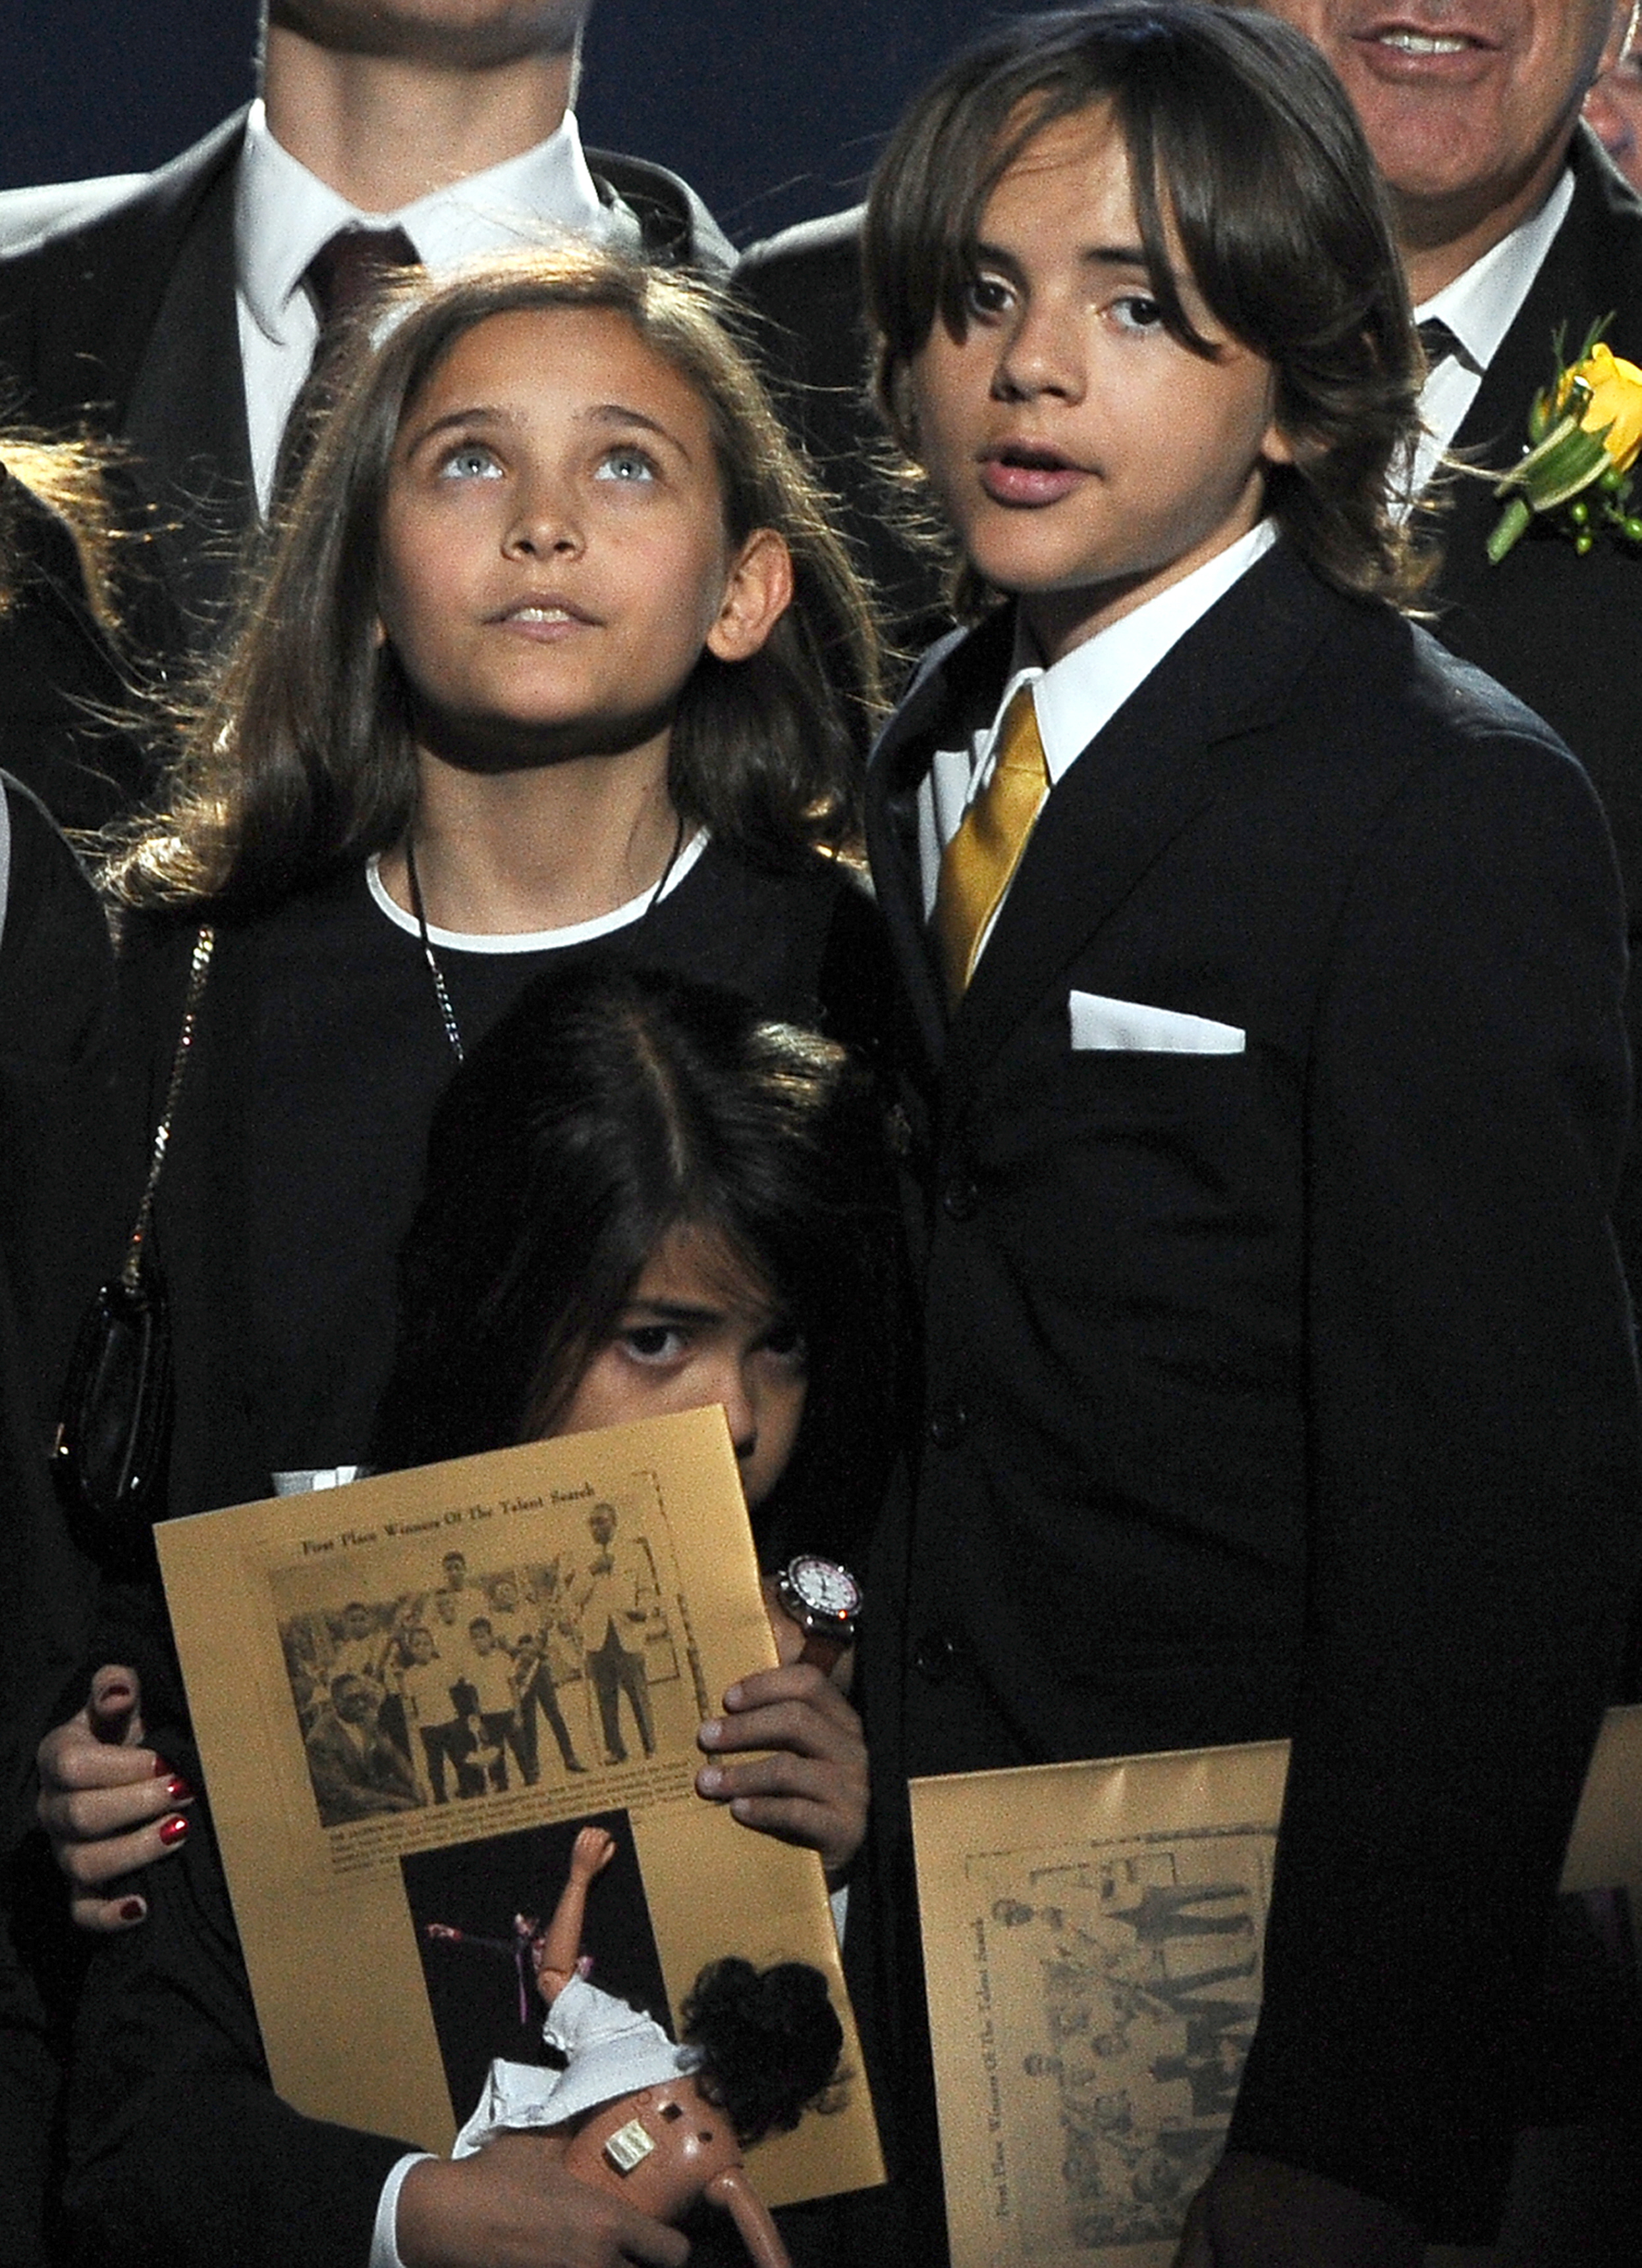 Blanket, Paris, and Prince Jackson during Michael Jackson's memorial service in Los Angeles, California on July 7, 2009 | Source: Getty Images